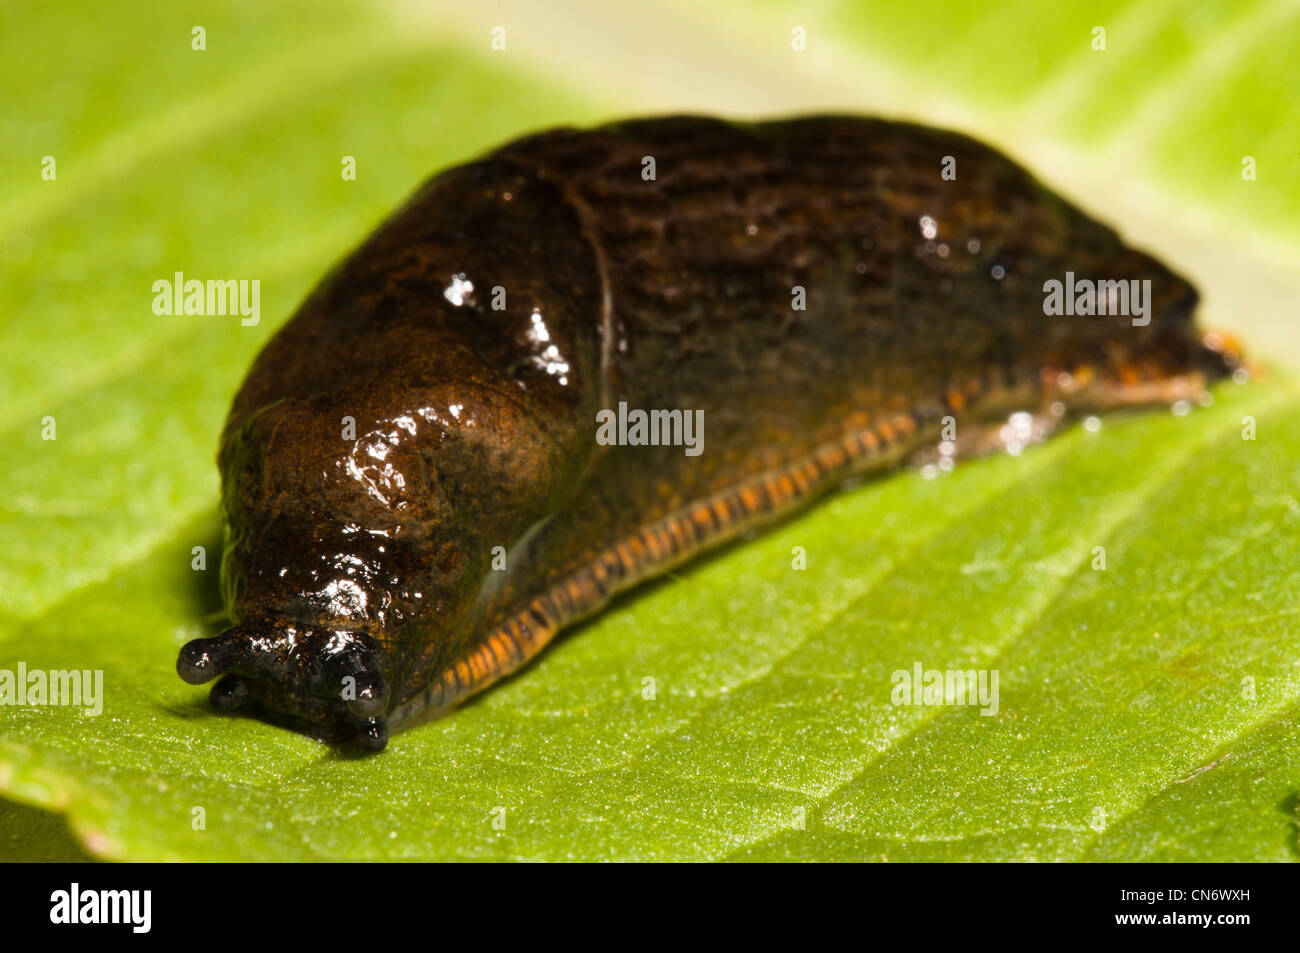 A black slug (Arion ater agg.) in its reddish brown form, on a leaf at Crossness Nature Reserve, Bexley, Kent. June. Stock Photo